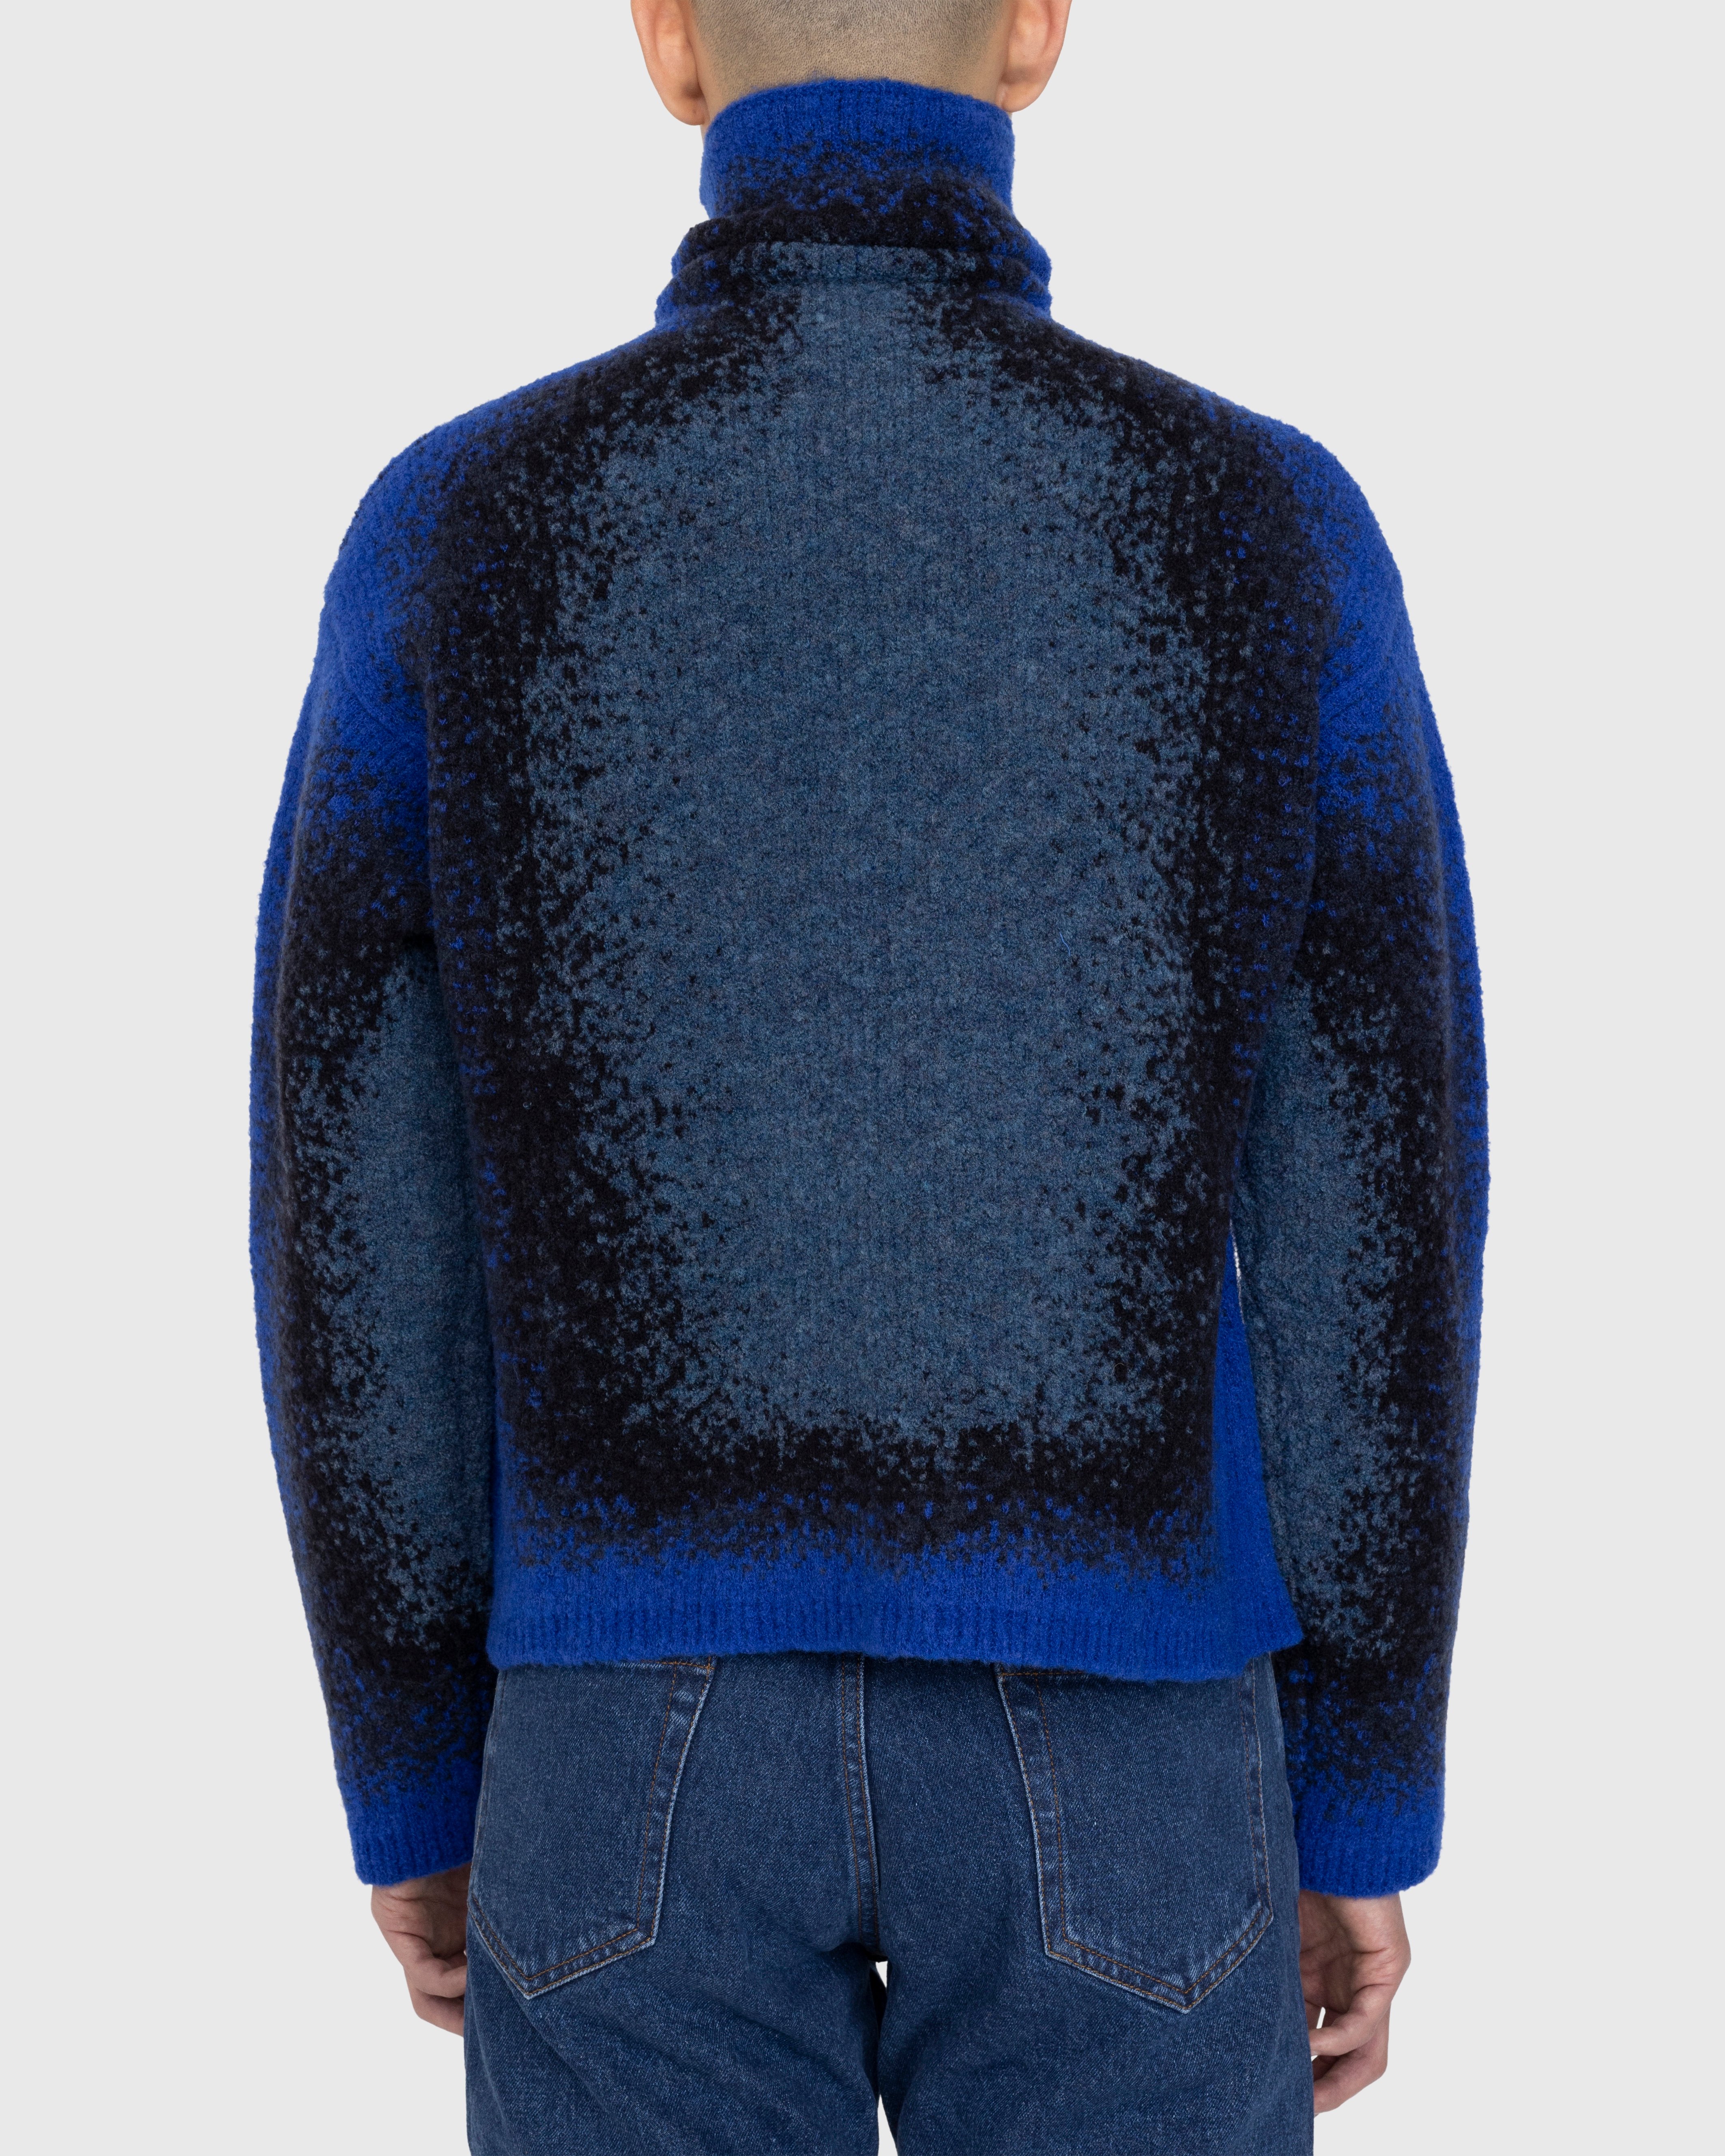 Y/Project - Gradient Heavy Knit Turtleneck Blue - Clothing - Blue - Image 3